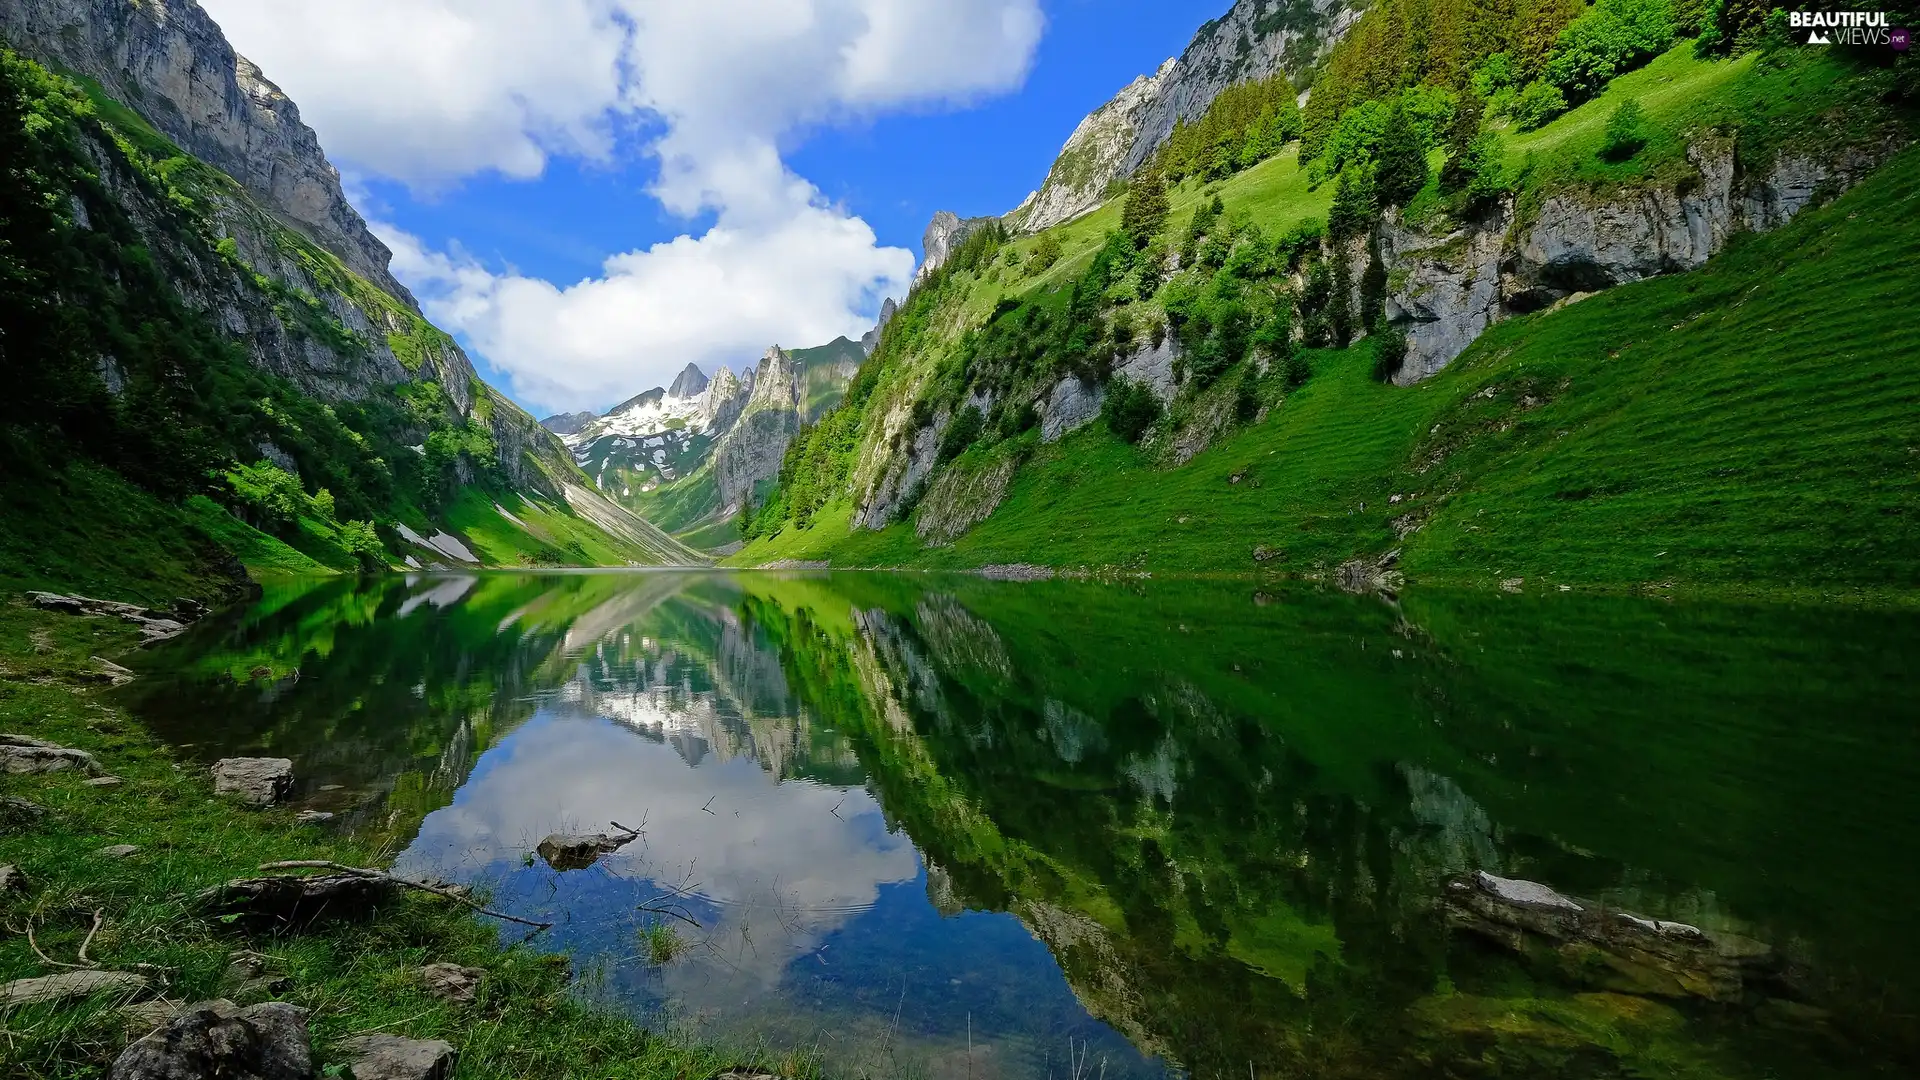 Alps Mountains, Rute Municipality, clouds, Appenzell Innerrhoden Canton, Switzerland, Falensee Lake, reflection